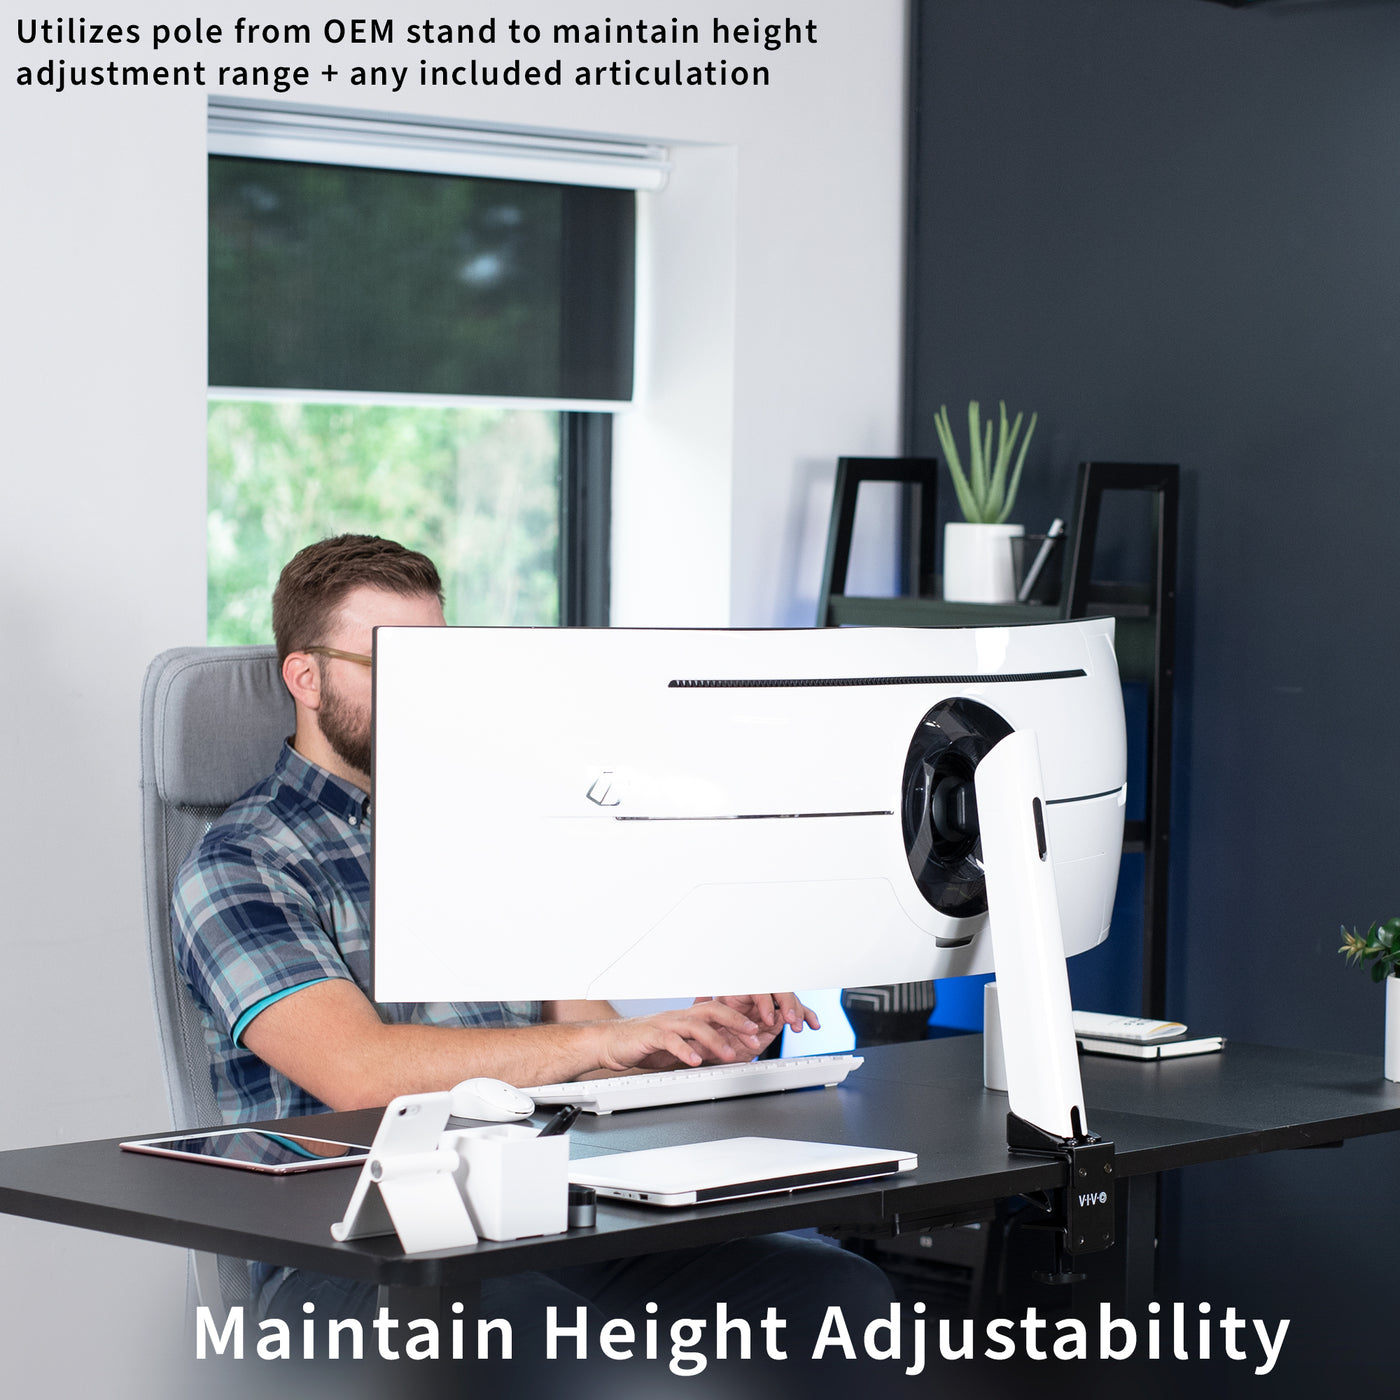 Space-saving desk clamp to mount Samsung monitor while maintaining height adjustment and articulation capabilities.